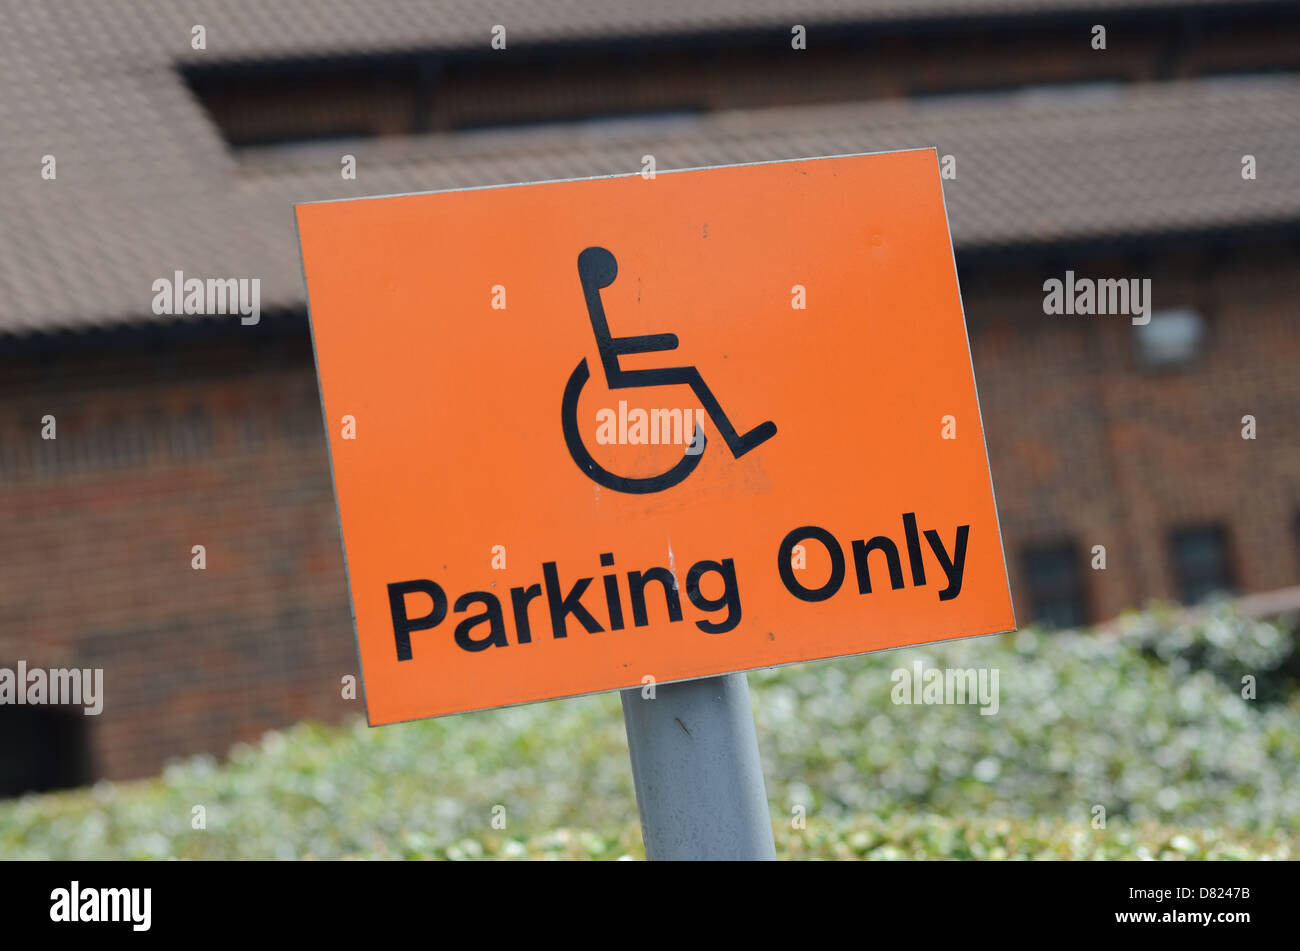 Disabled parking sign. Stock Photo